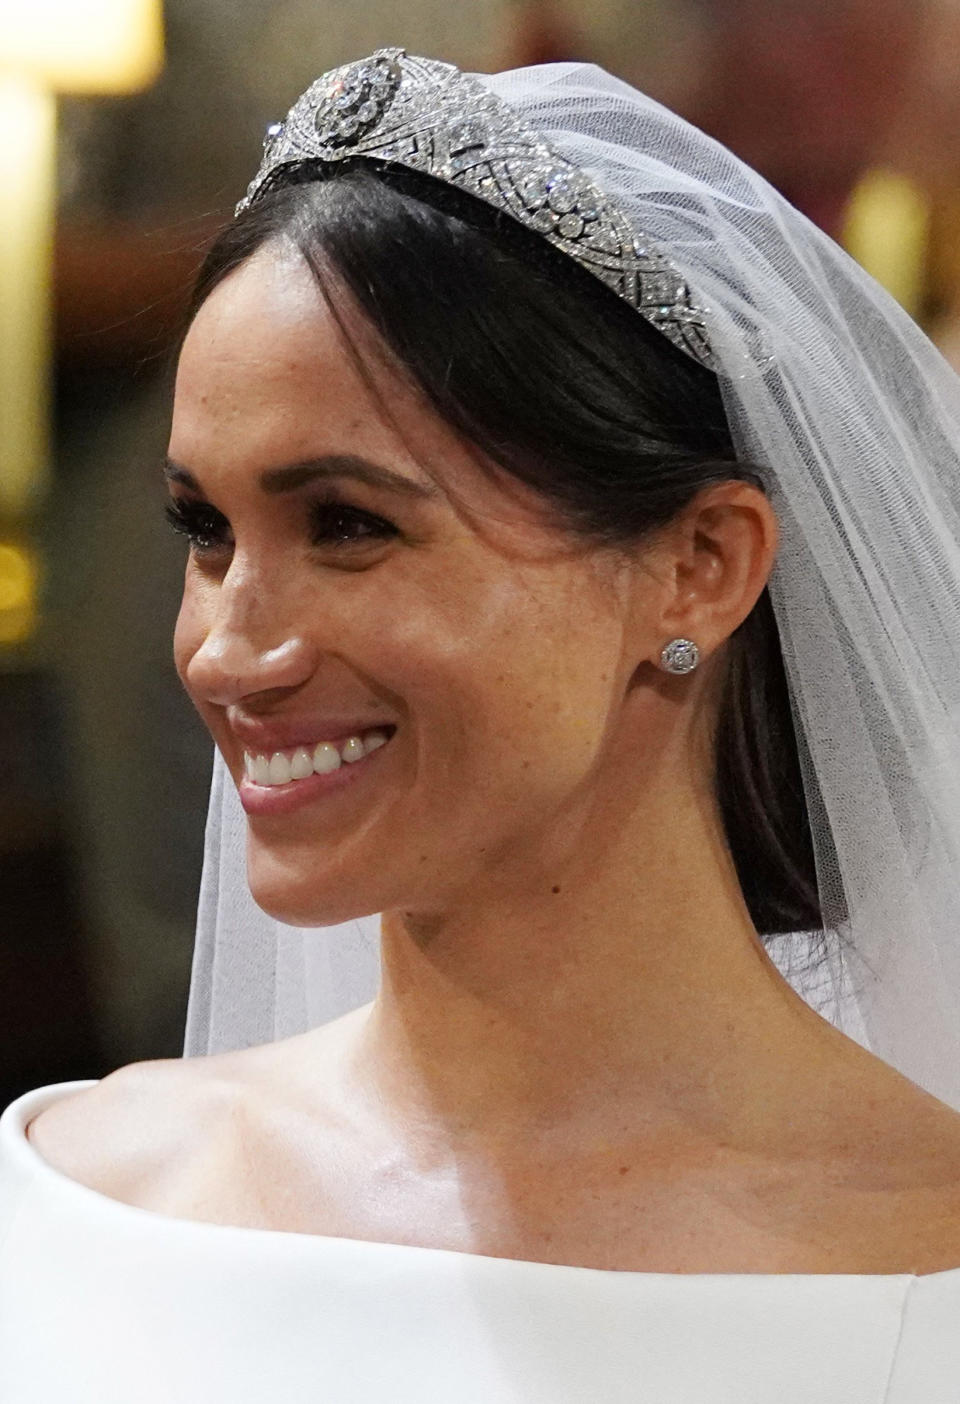 Meghan Markle in St George's Chapel at Windsor Castle during her wedding to Prince Harry, May 19, 2018.